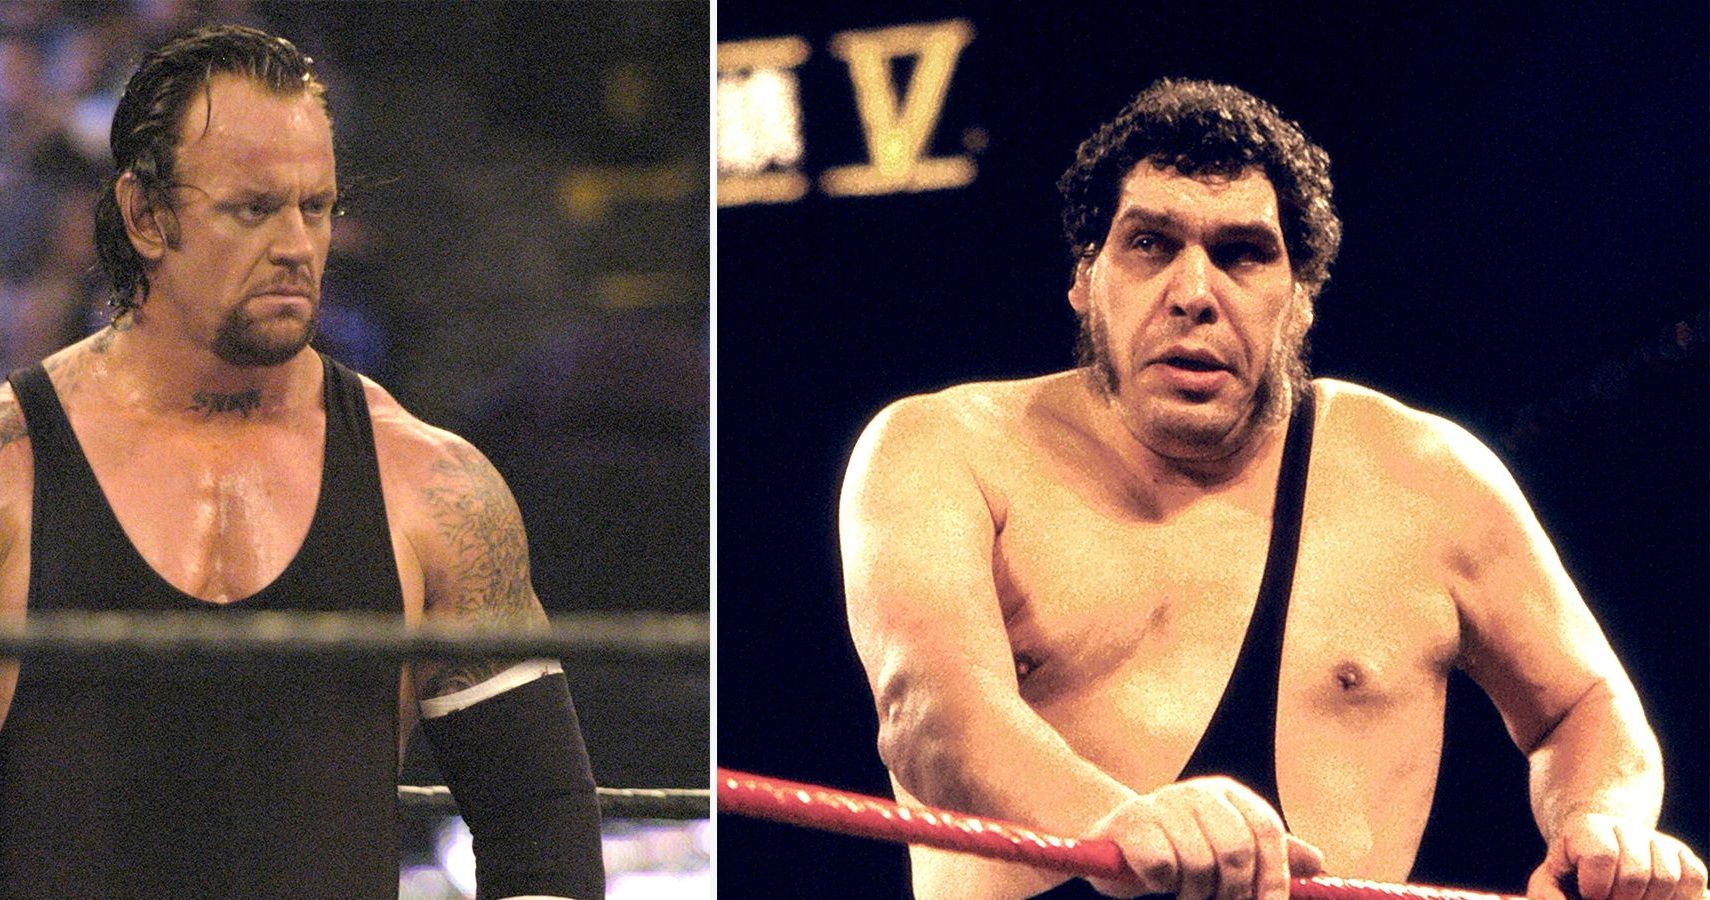 Undertaker and Andre The Giant